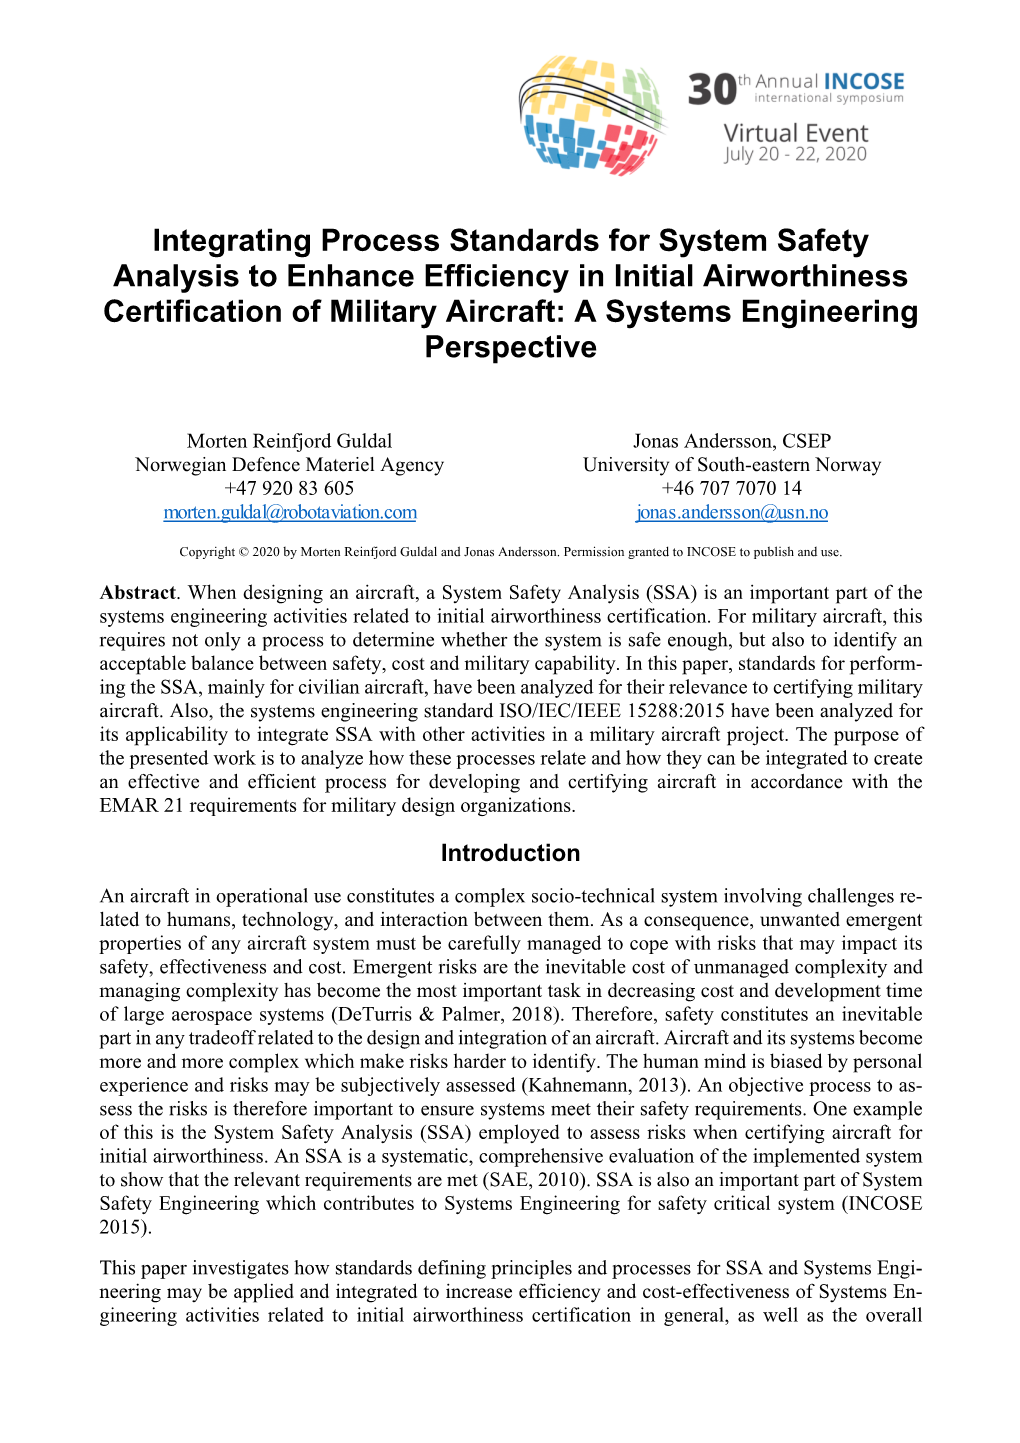 Integrating Process Standards for System Safety Analysis to Enhance